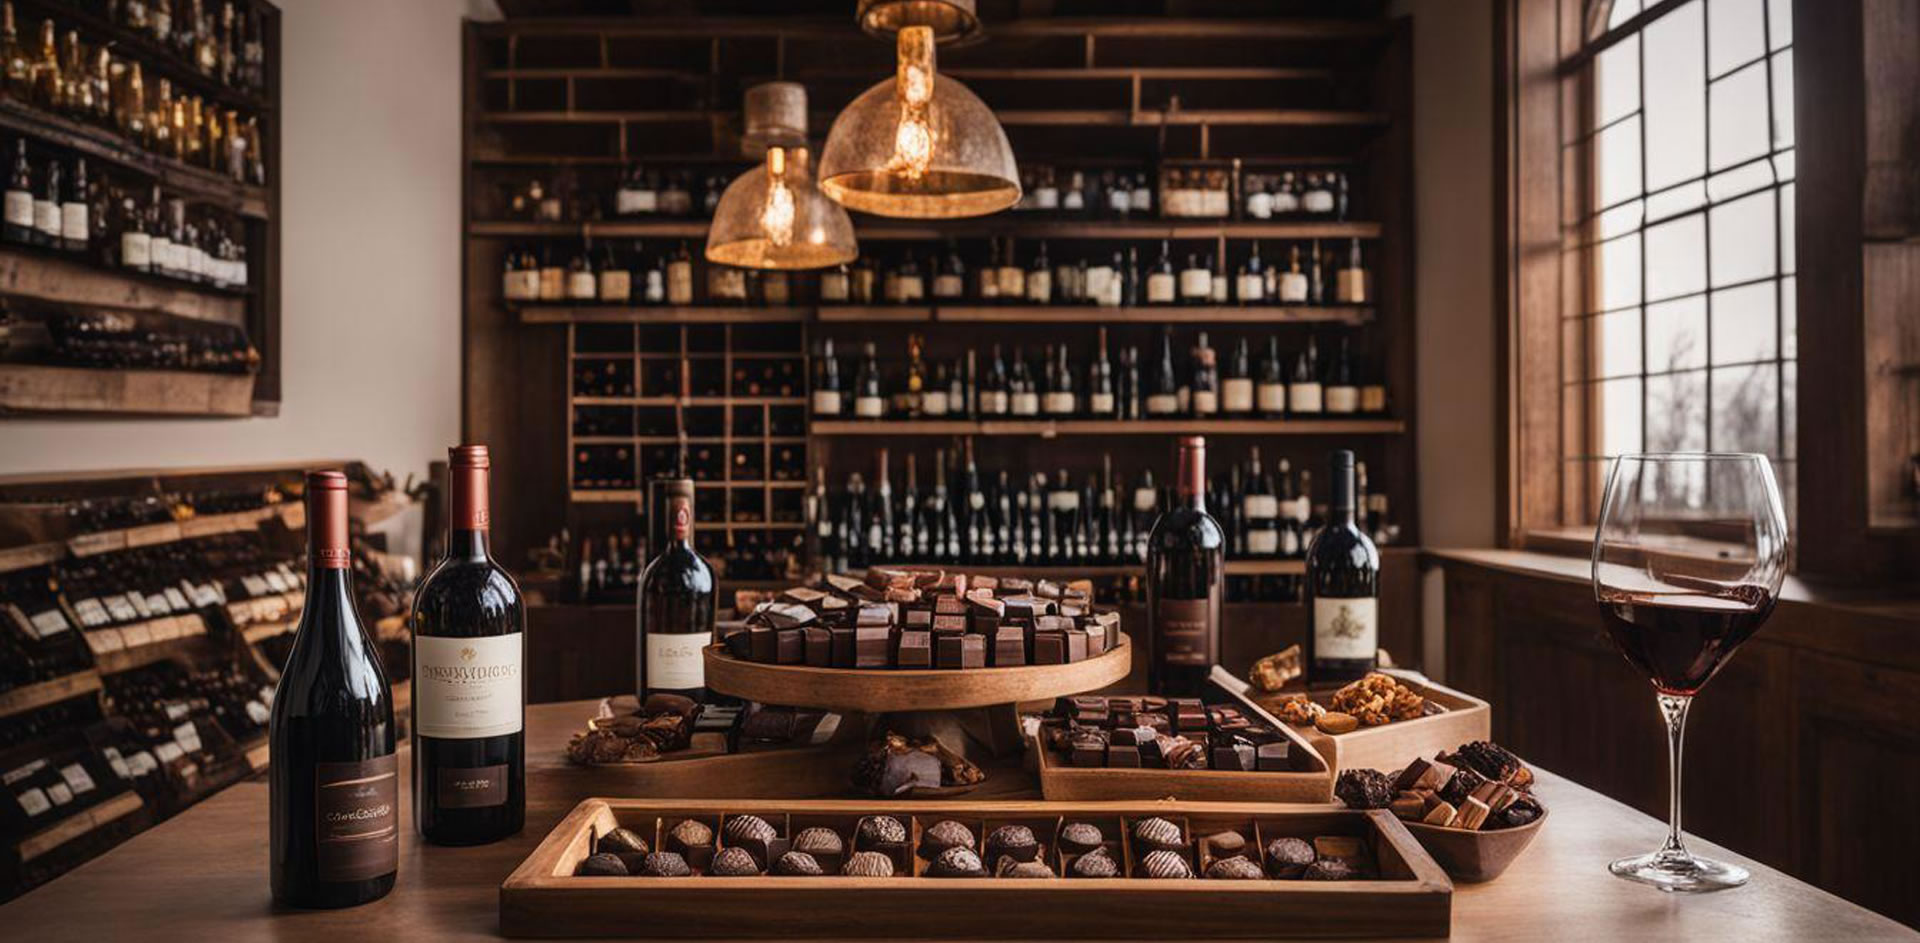 A table with wine bottles and chocolates